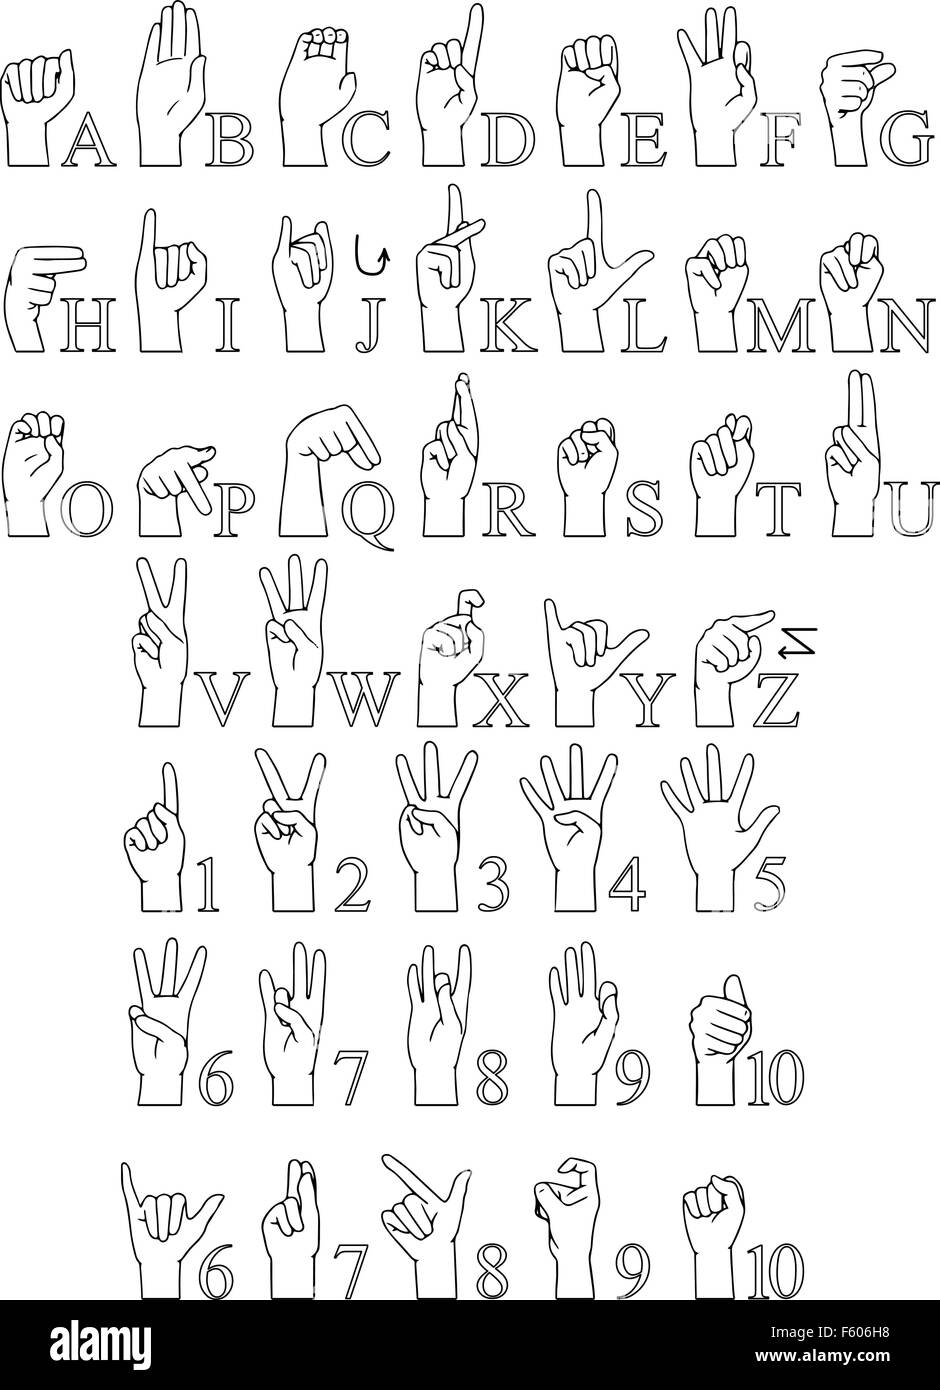 Vector illustrations pack of sign language ABC and numbers. Stock Vector